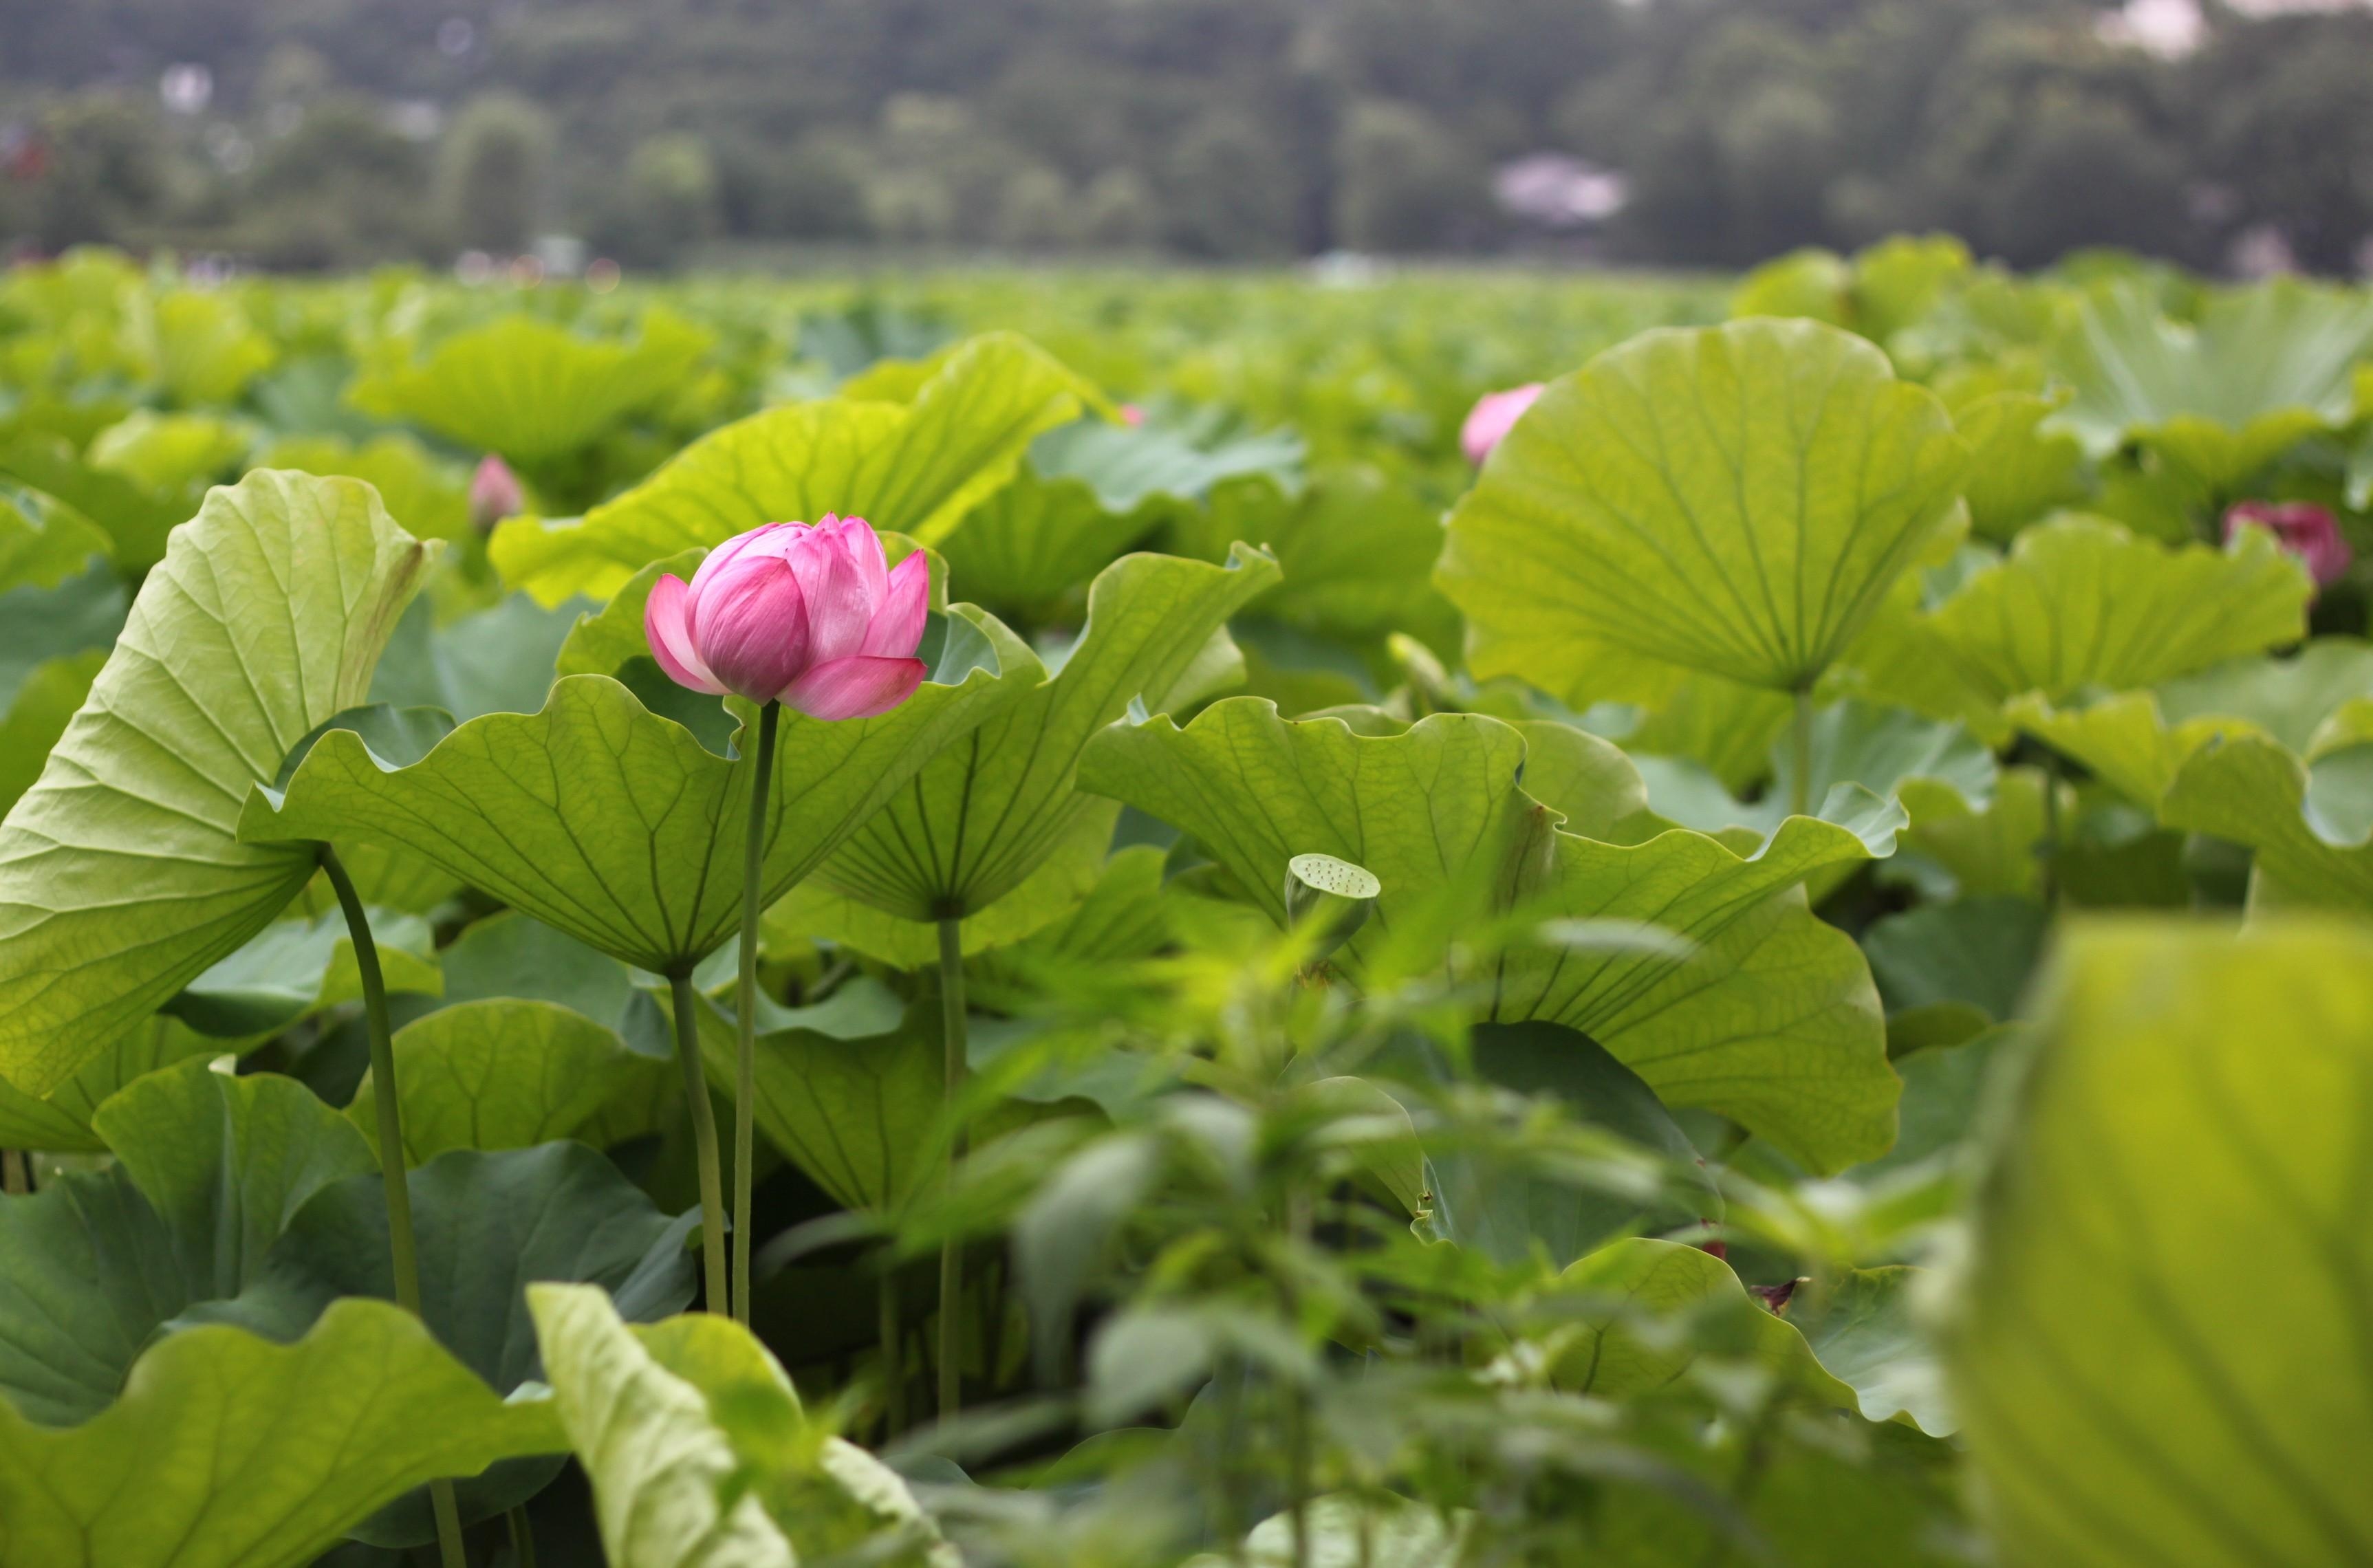 greens, flowers, leaves, sharpness, lotuses wallpapers for tablet